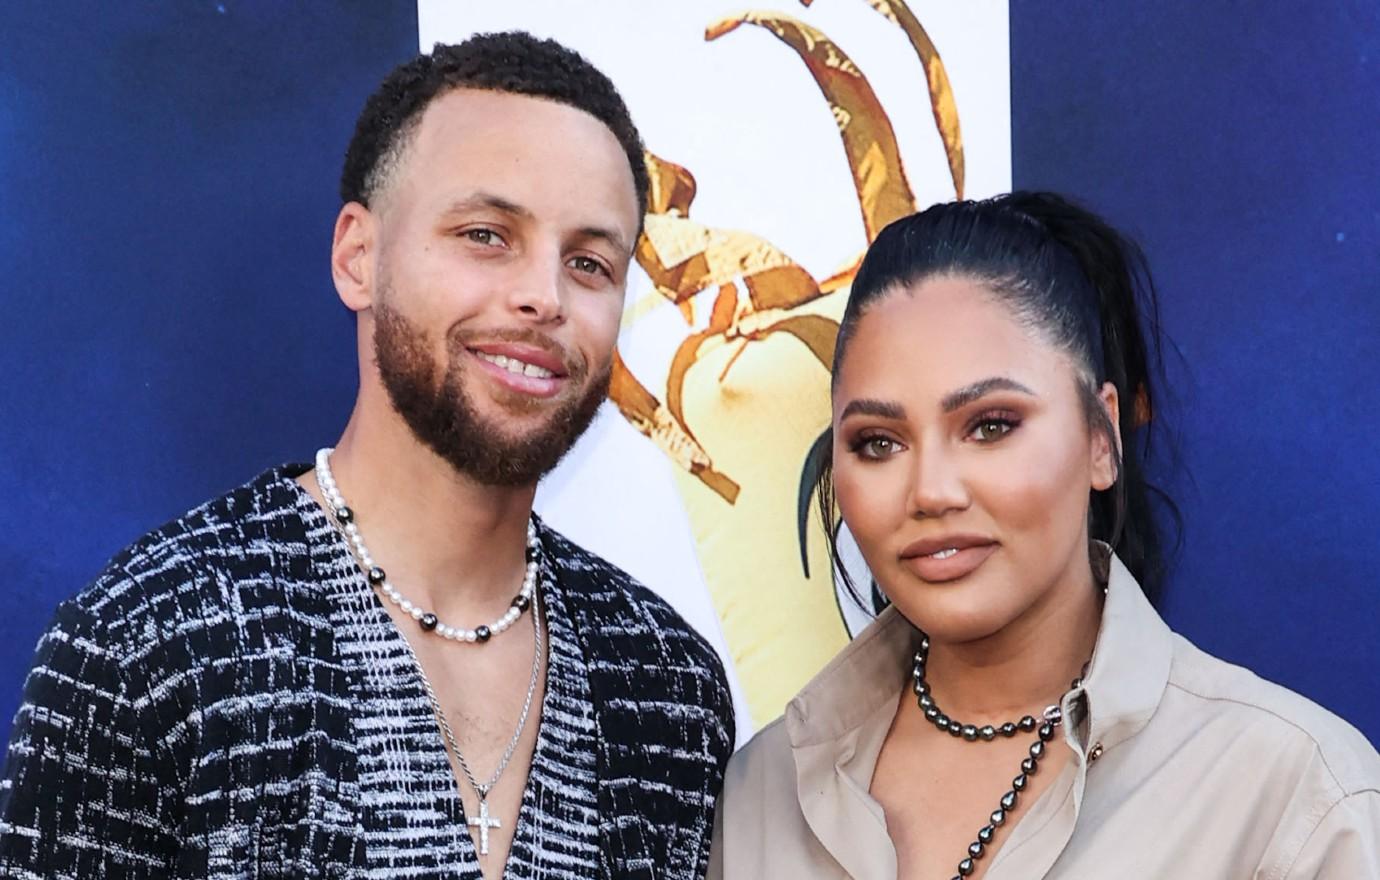 Ayesha Curry Ditching The Blonde Bombshell Look, Instagram Disapproves -  The Blast